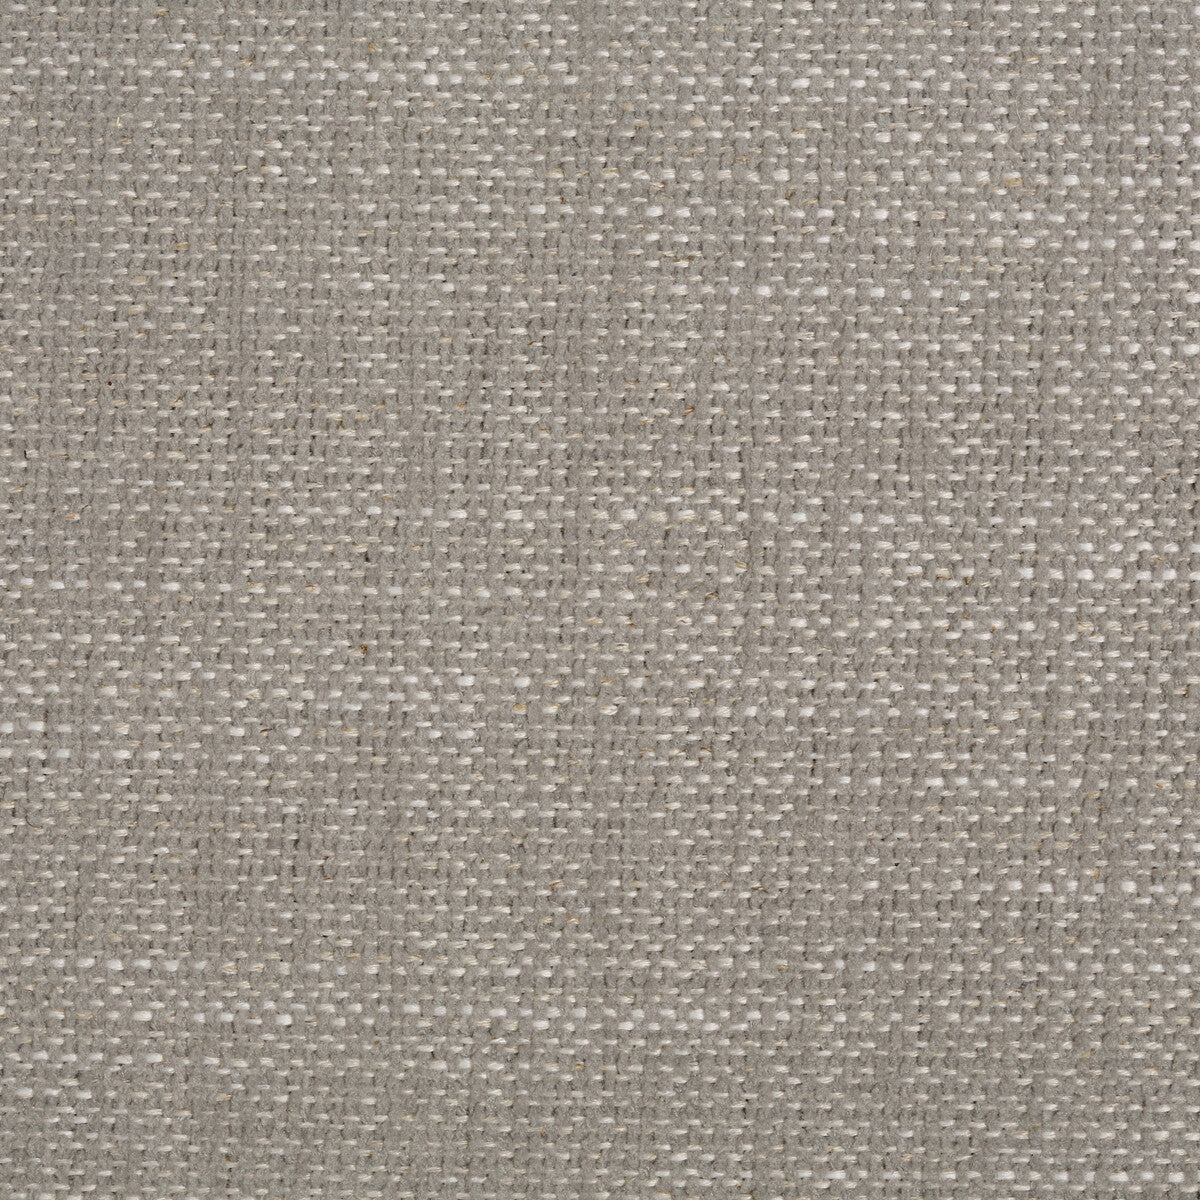 Kravet Smart fabric in 35111-11 color - pattern 35111.11.0 - by Kravet Smart in the Performance Crypton Home collection